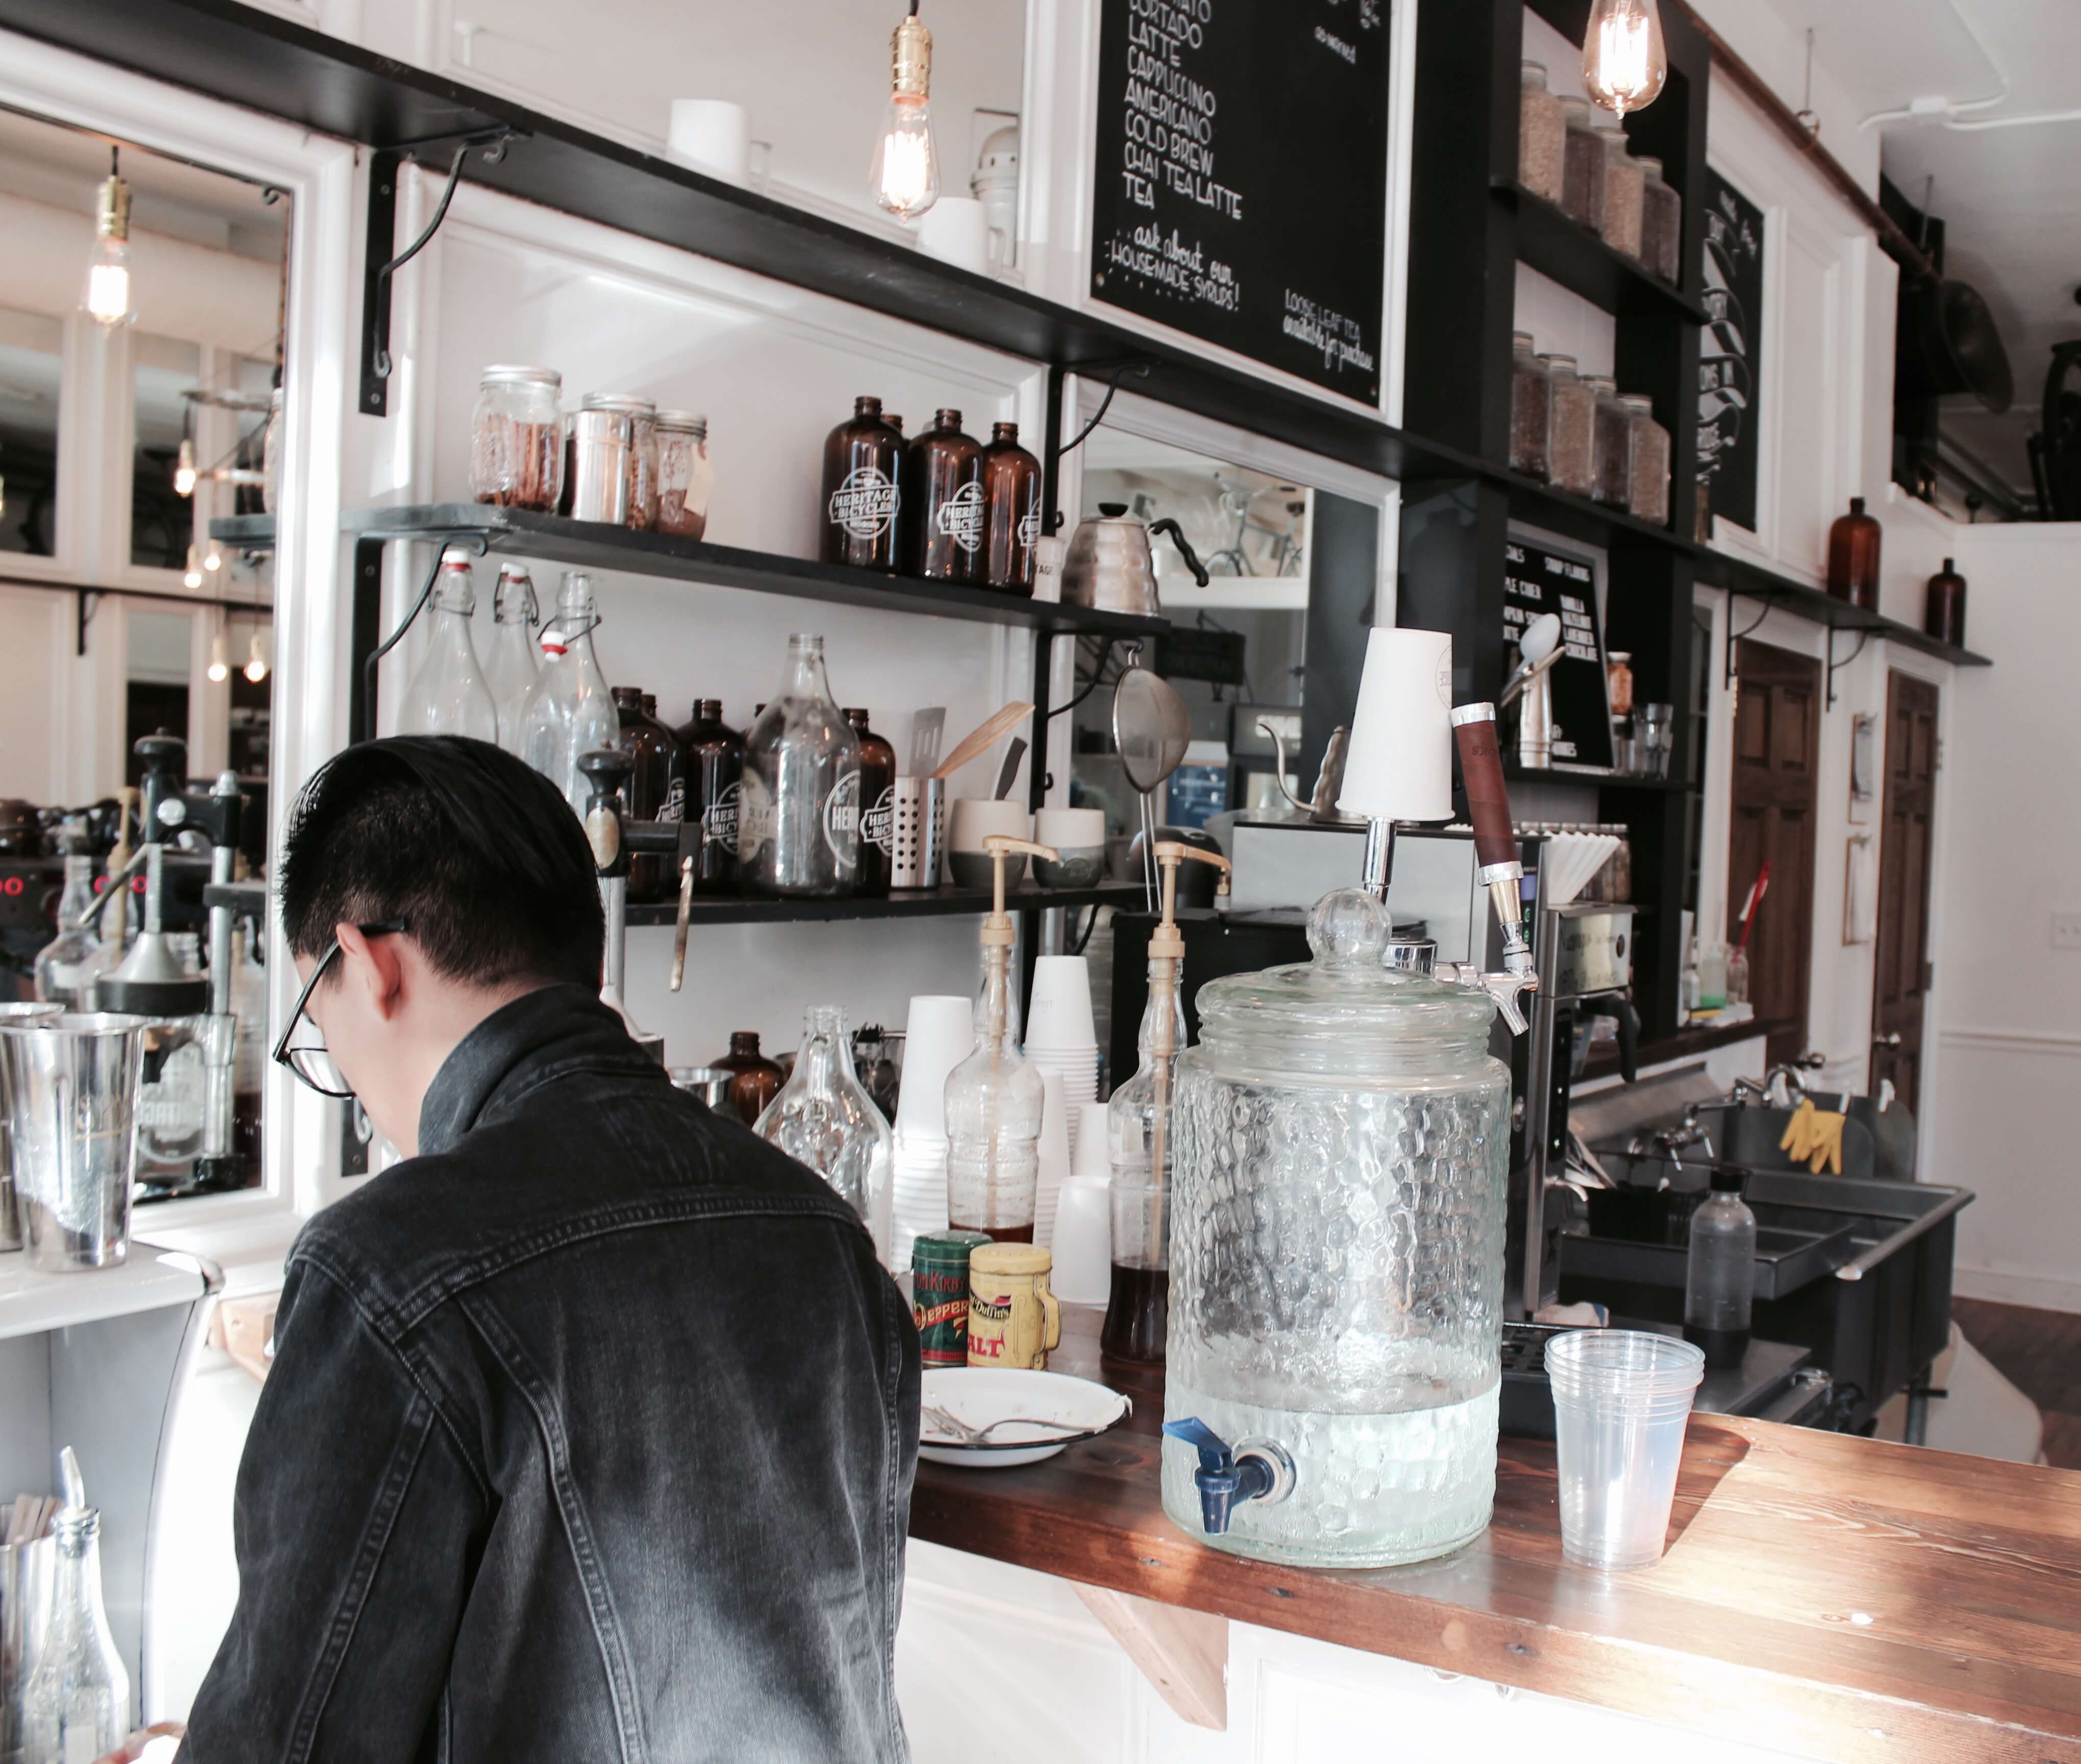 The 5 Best Coffee Shops in Chicago for Getting Work Done